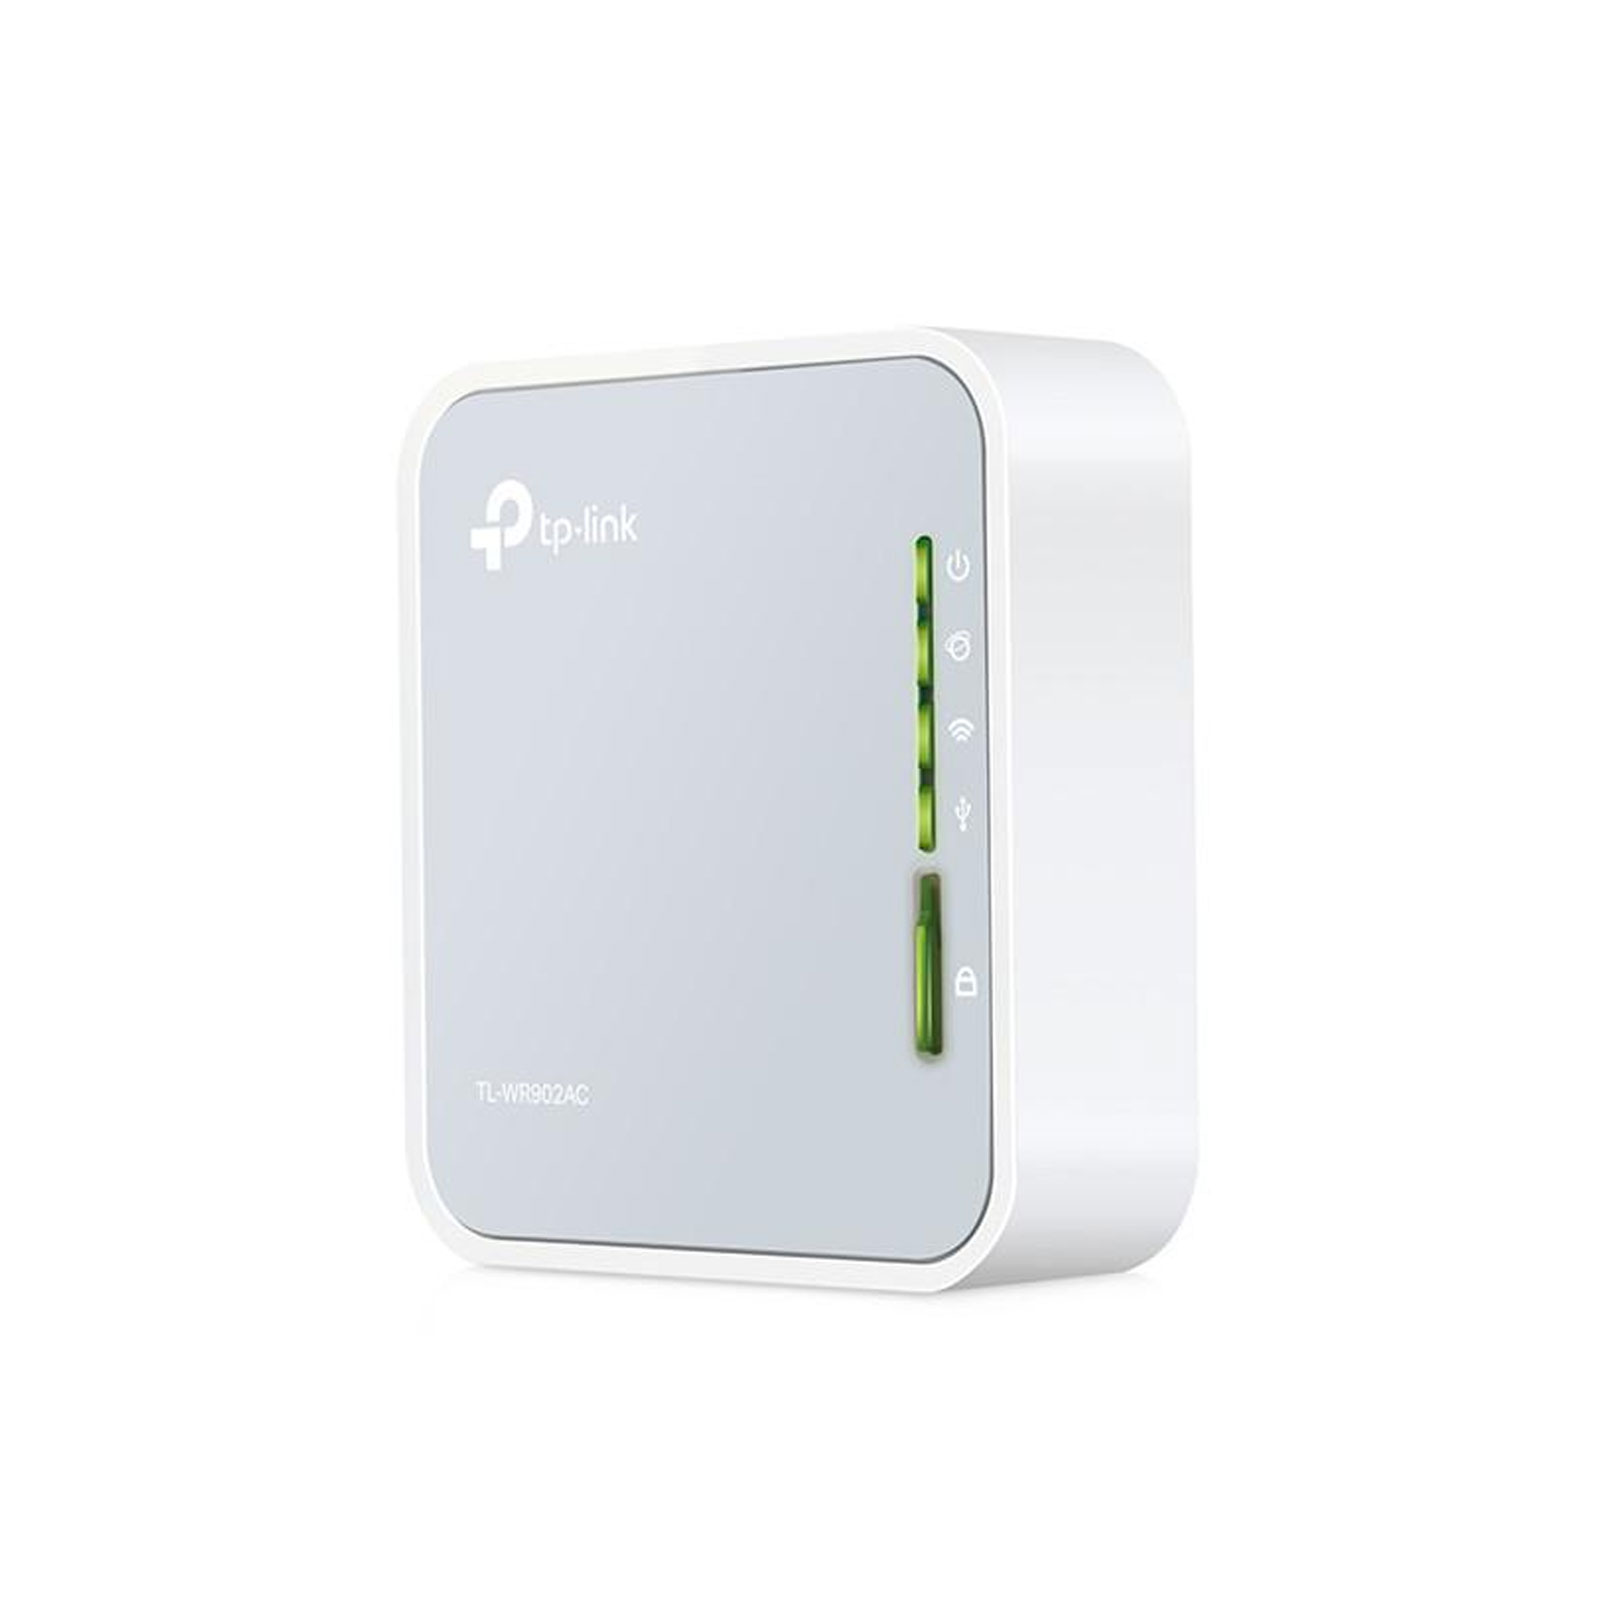 TP-Link Tragbarer AC750-WLAN-Router Router (TL-WR902AC)